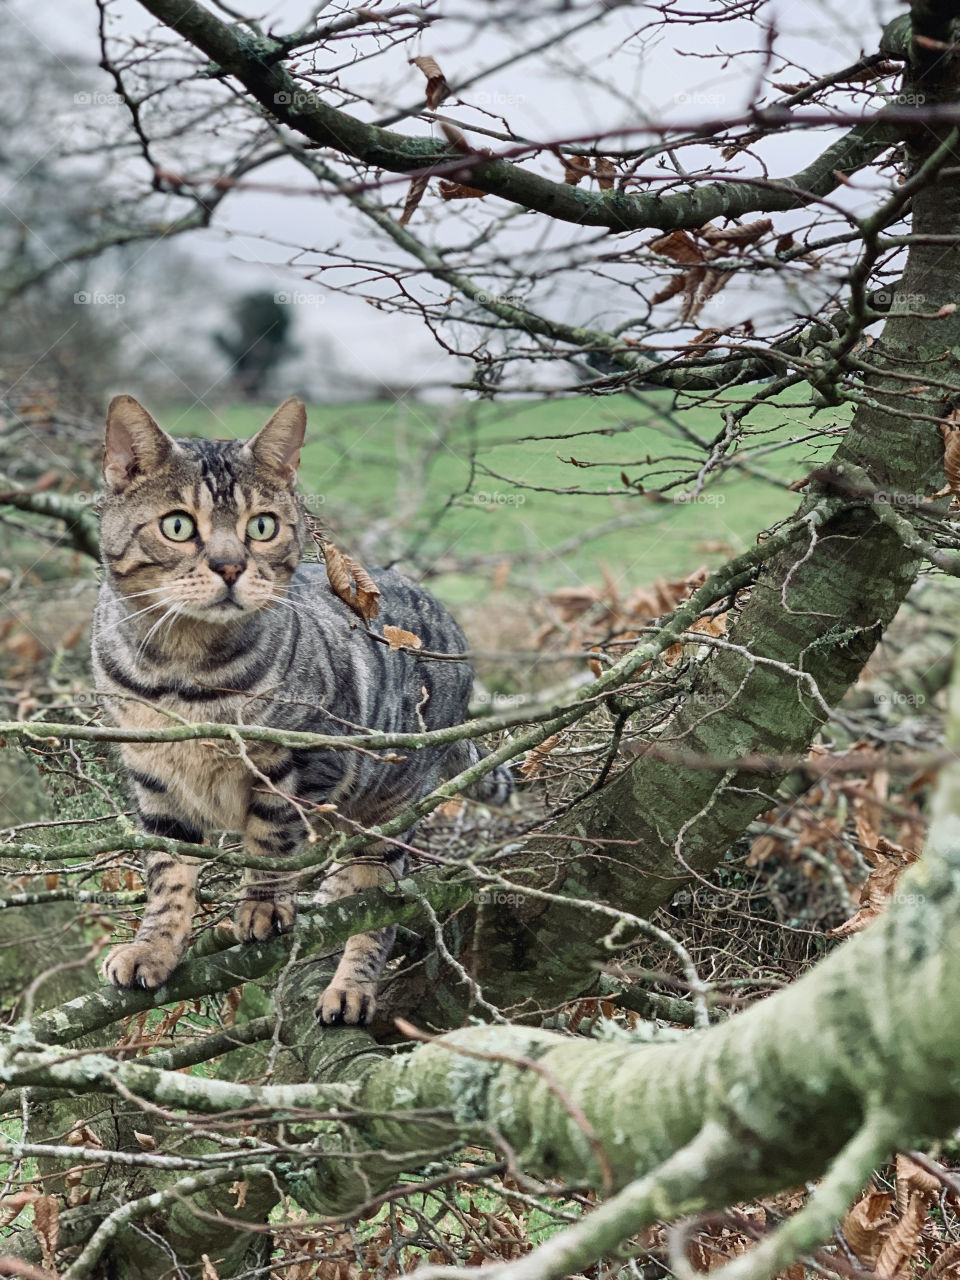 Our cat Raj taking me out for some fresh air in the countryside.